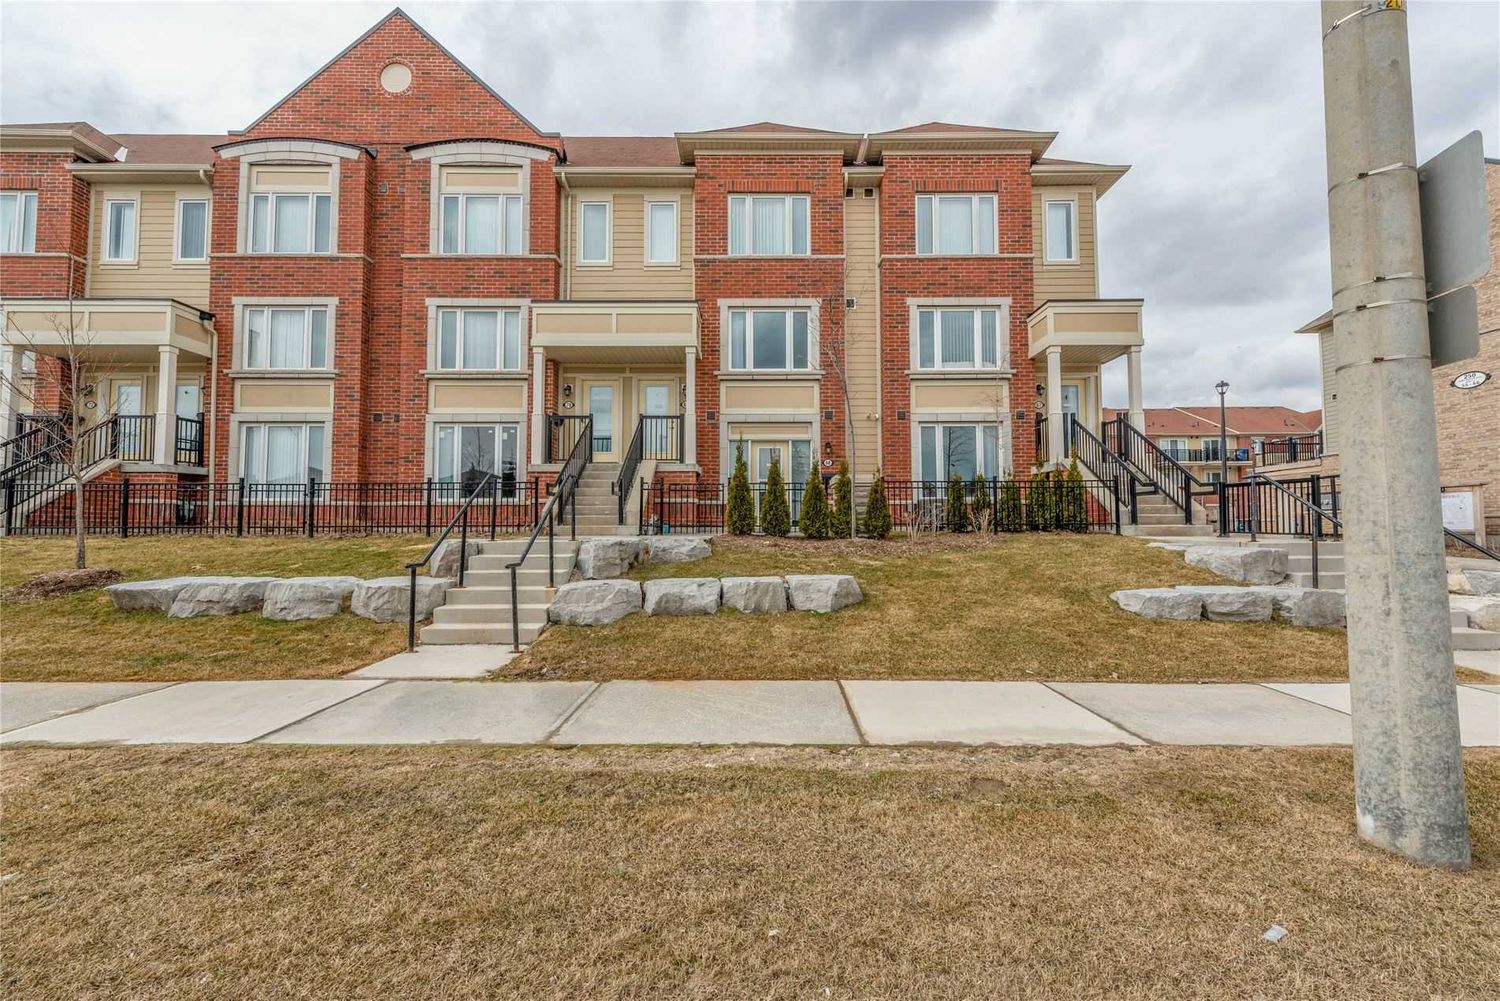 250 Sunny Meadow Boulevard. Sunny Meadow Townhomes is located in  Brampton, Toronto - image #2 of 3